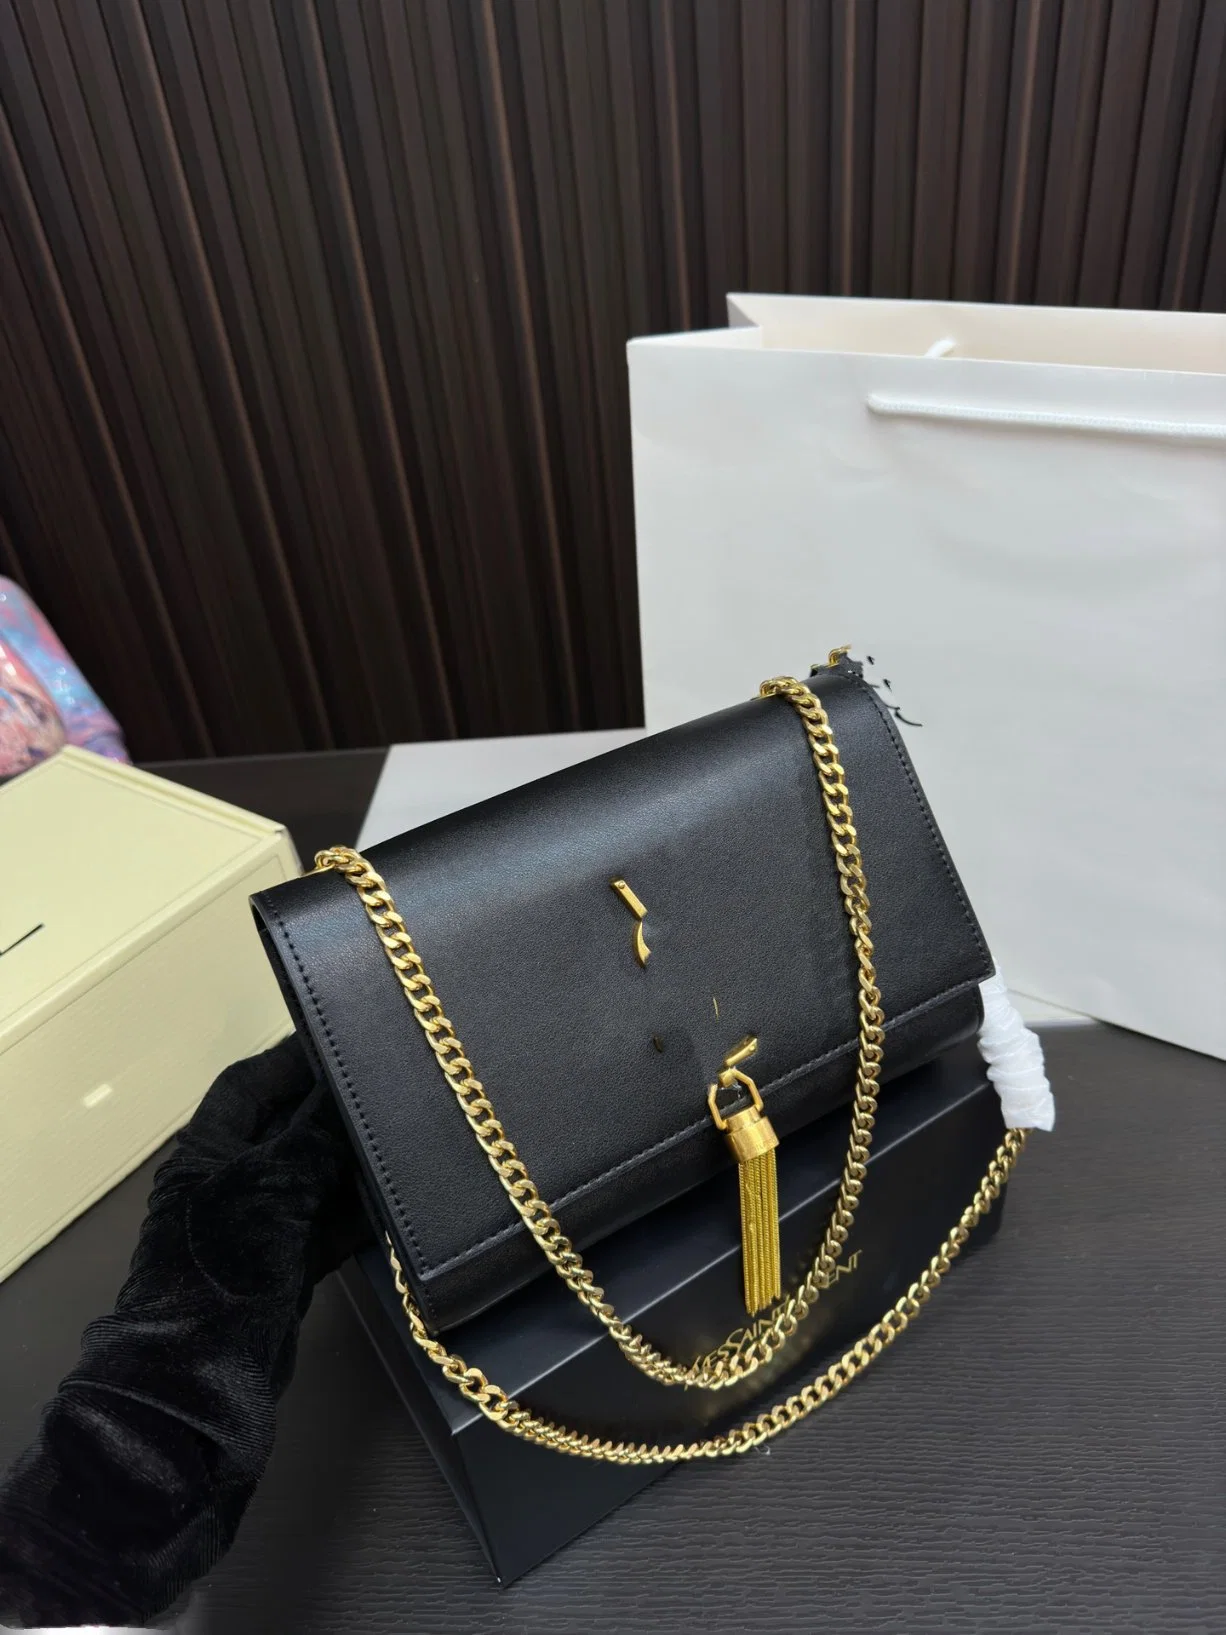 Wholesale Designer Replica Bags Travel Bags Luxury Bags Fashion Bags Ladies Bags Large Luggage Bags Ship with Gift Box